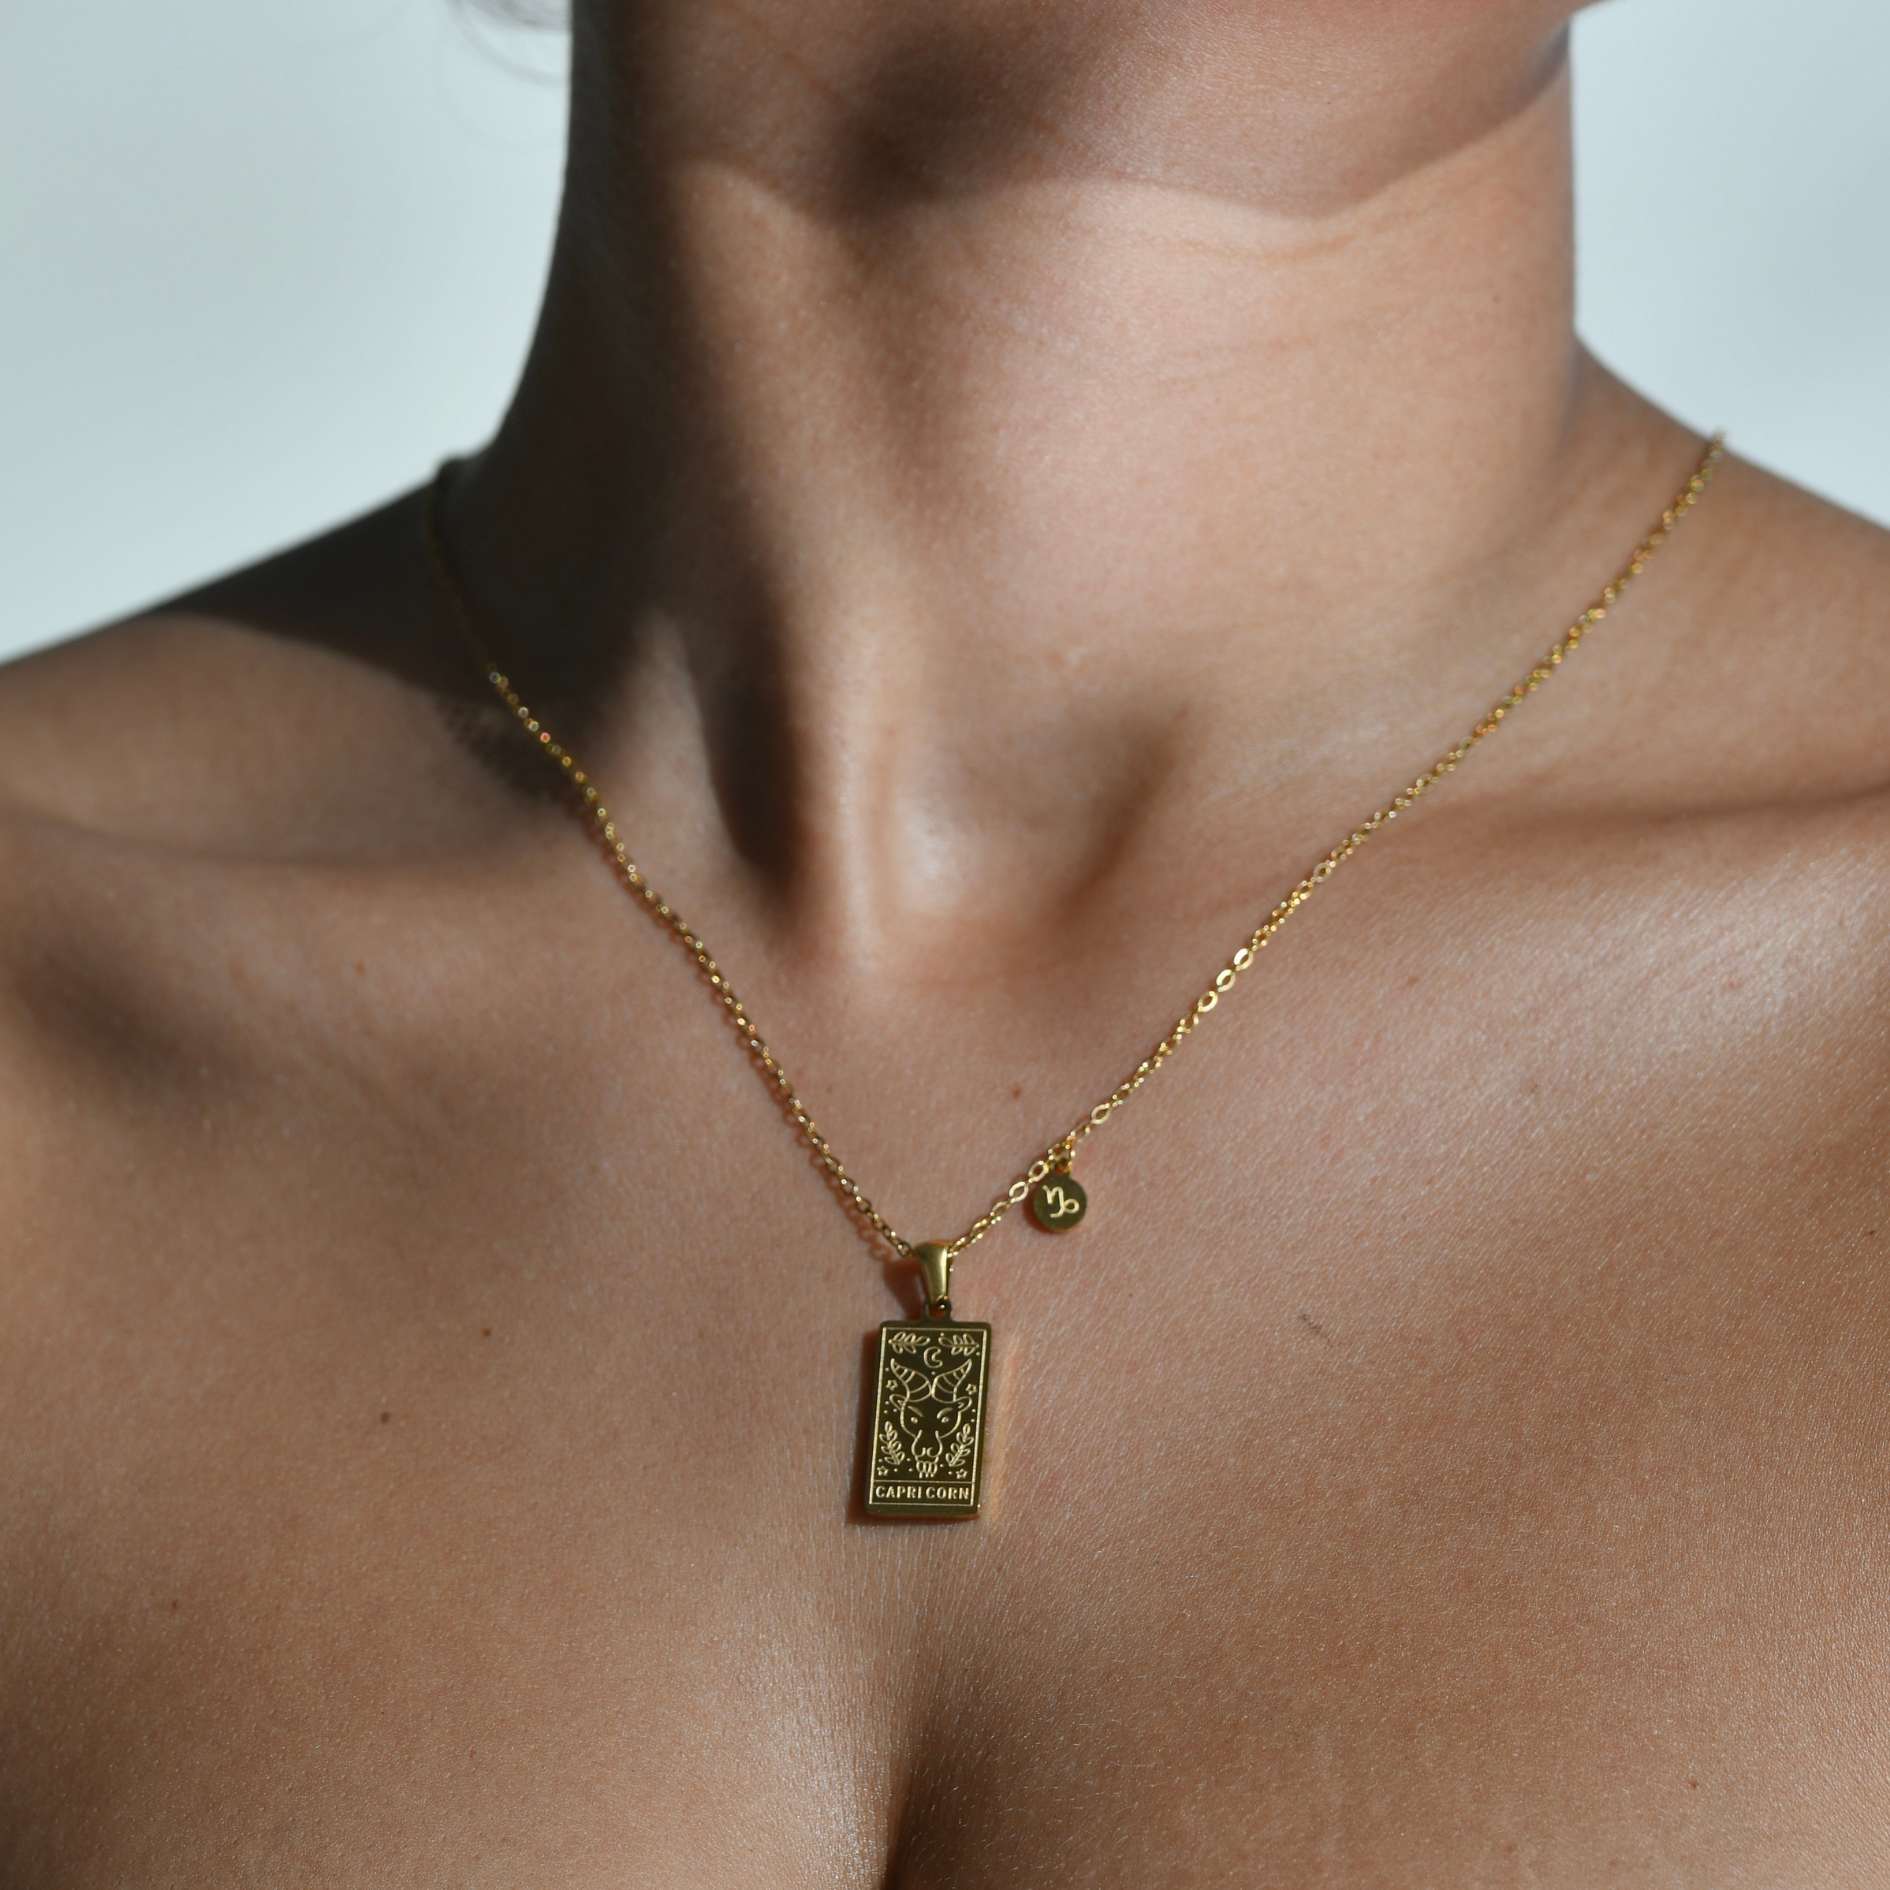 CAPRICORN Zodiac Pendant Gold Necklace. rectangular gold pendant. gold chain. the zodiacal sign of the goat with the goat's head is engraved on the pendant and the word capricorn is engraved on the bottom. at the side of the pendant attached on the chain is a small medallion with the capricorn symbol engraved on it.